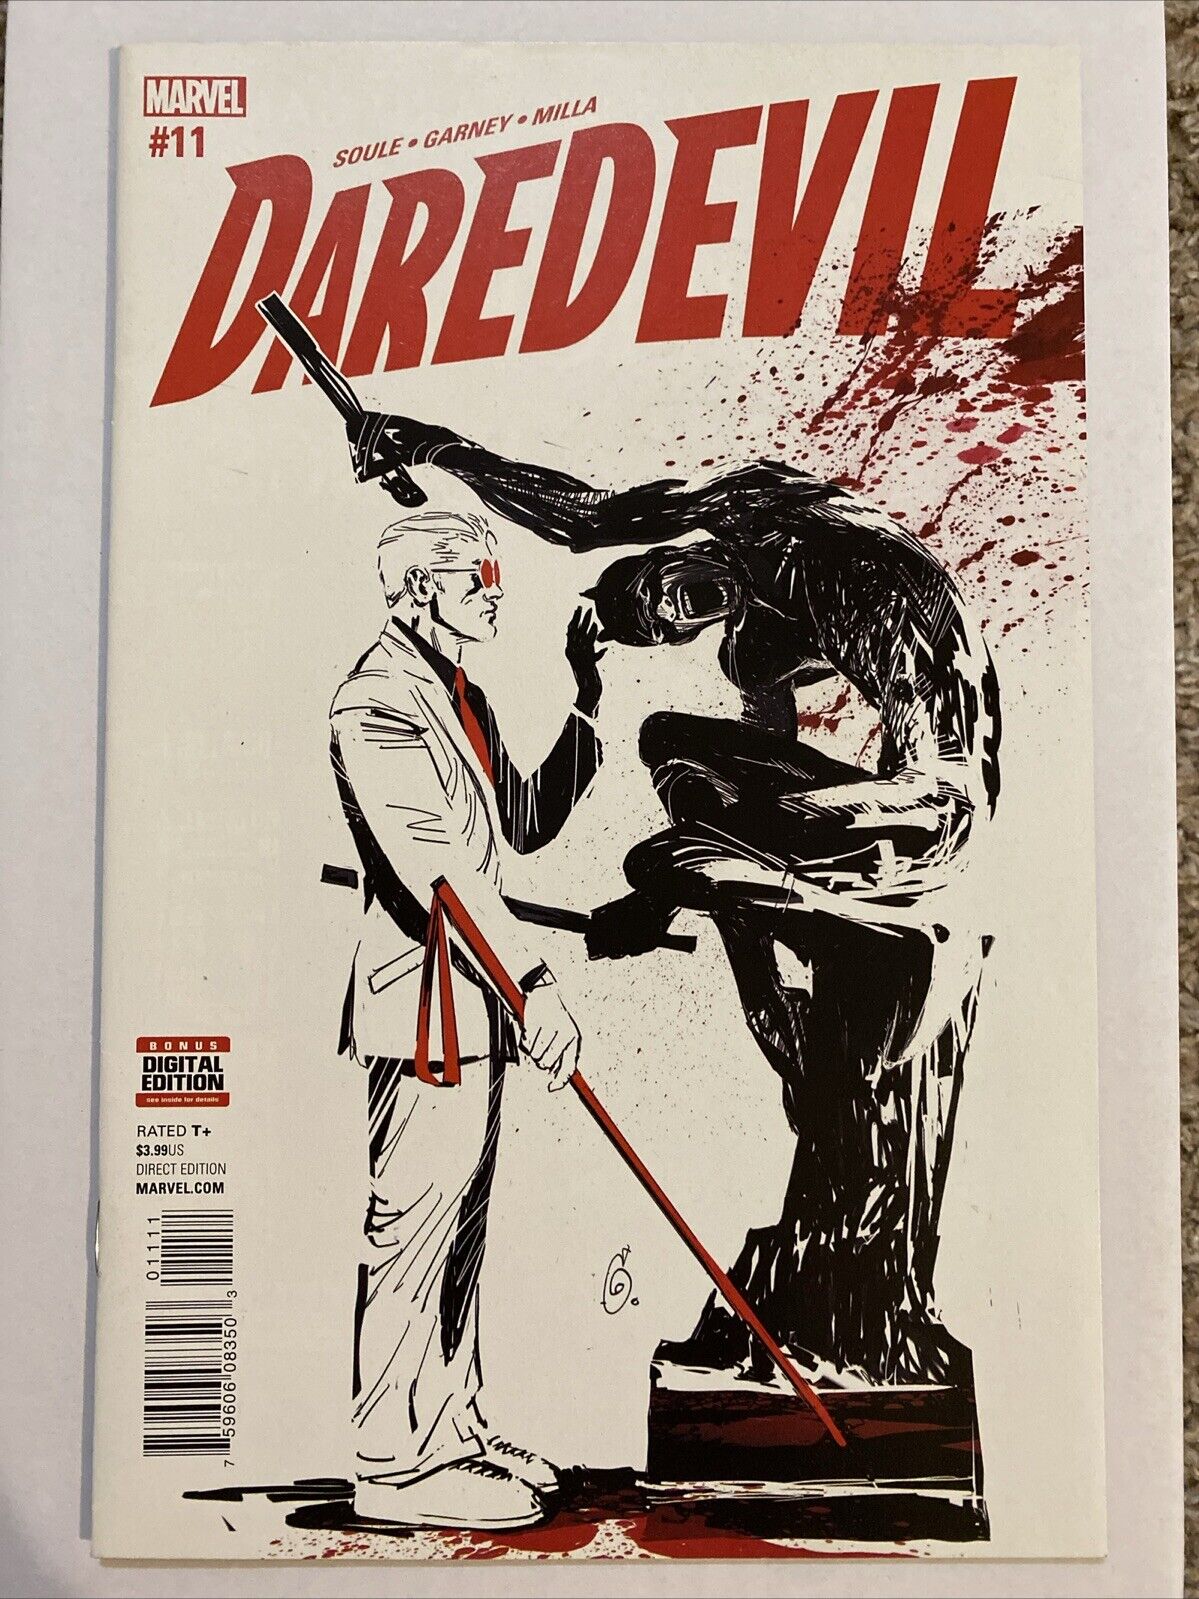 DAREDEVIL # 11 * FIRST APPEARANCE MUSE * MARVEL COMICS * 2016 * NEAR MINT